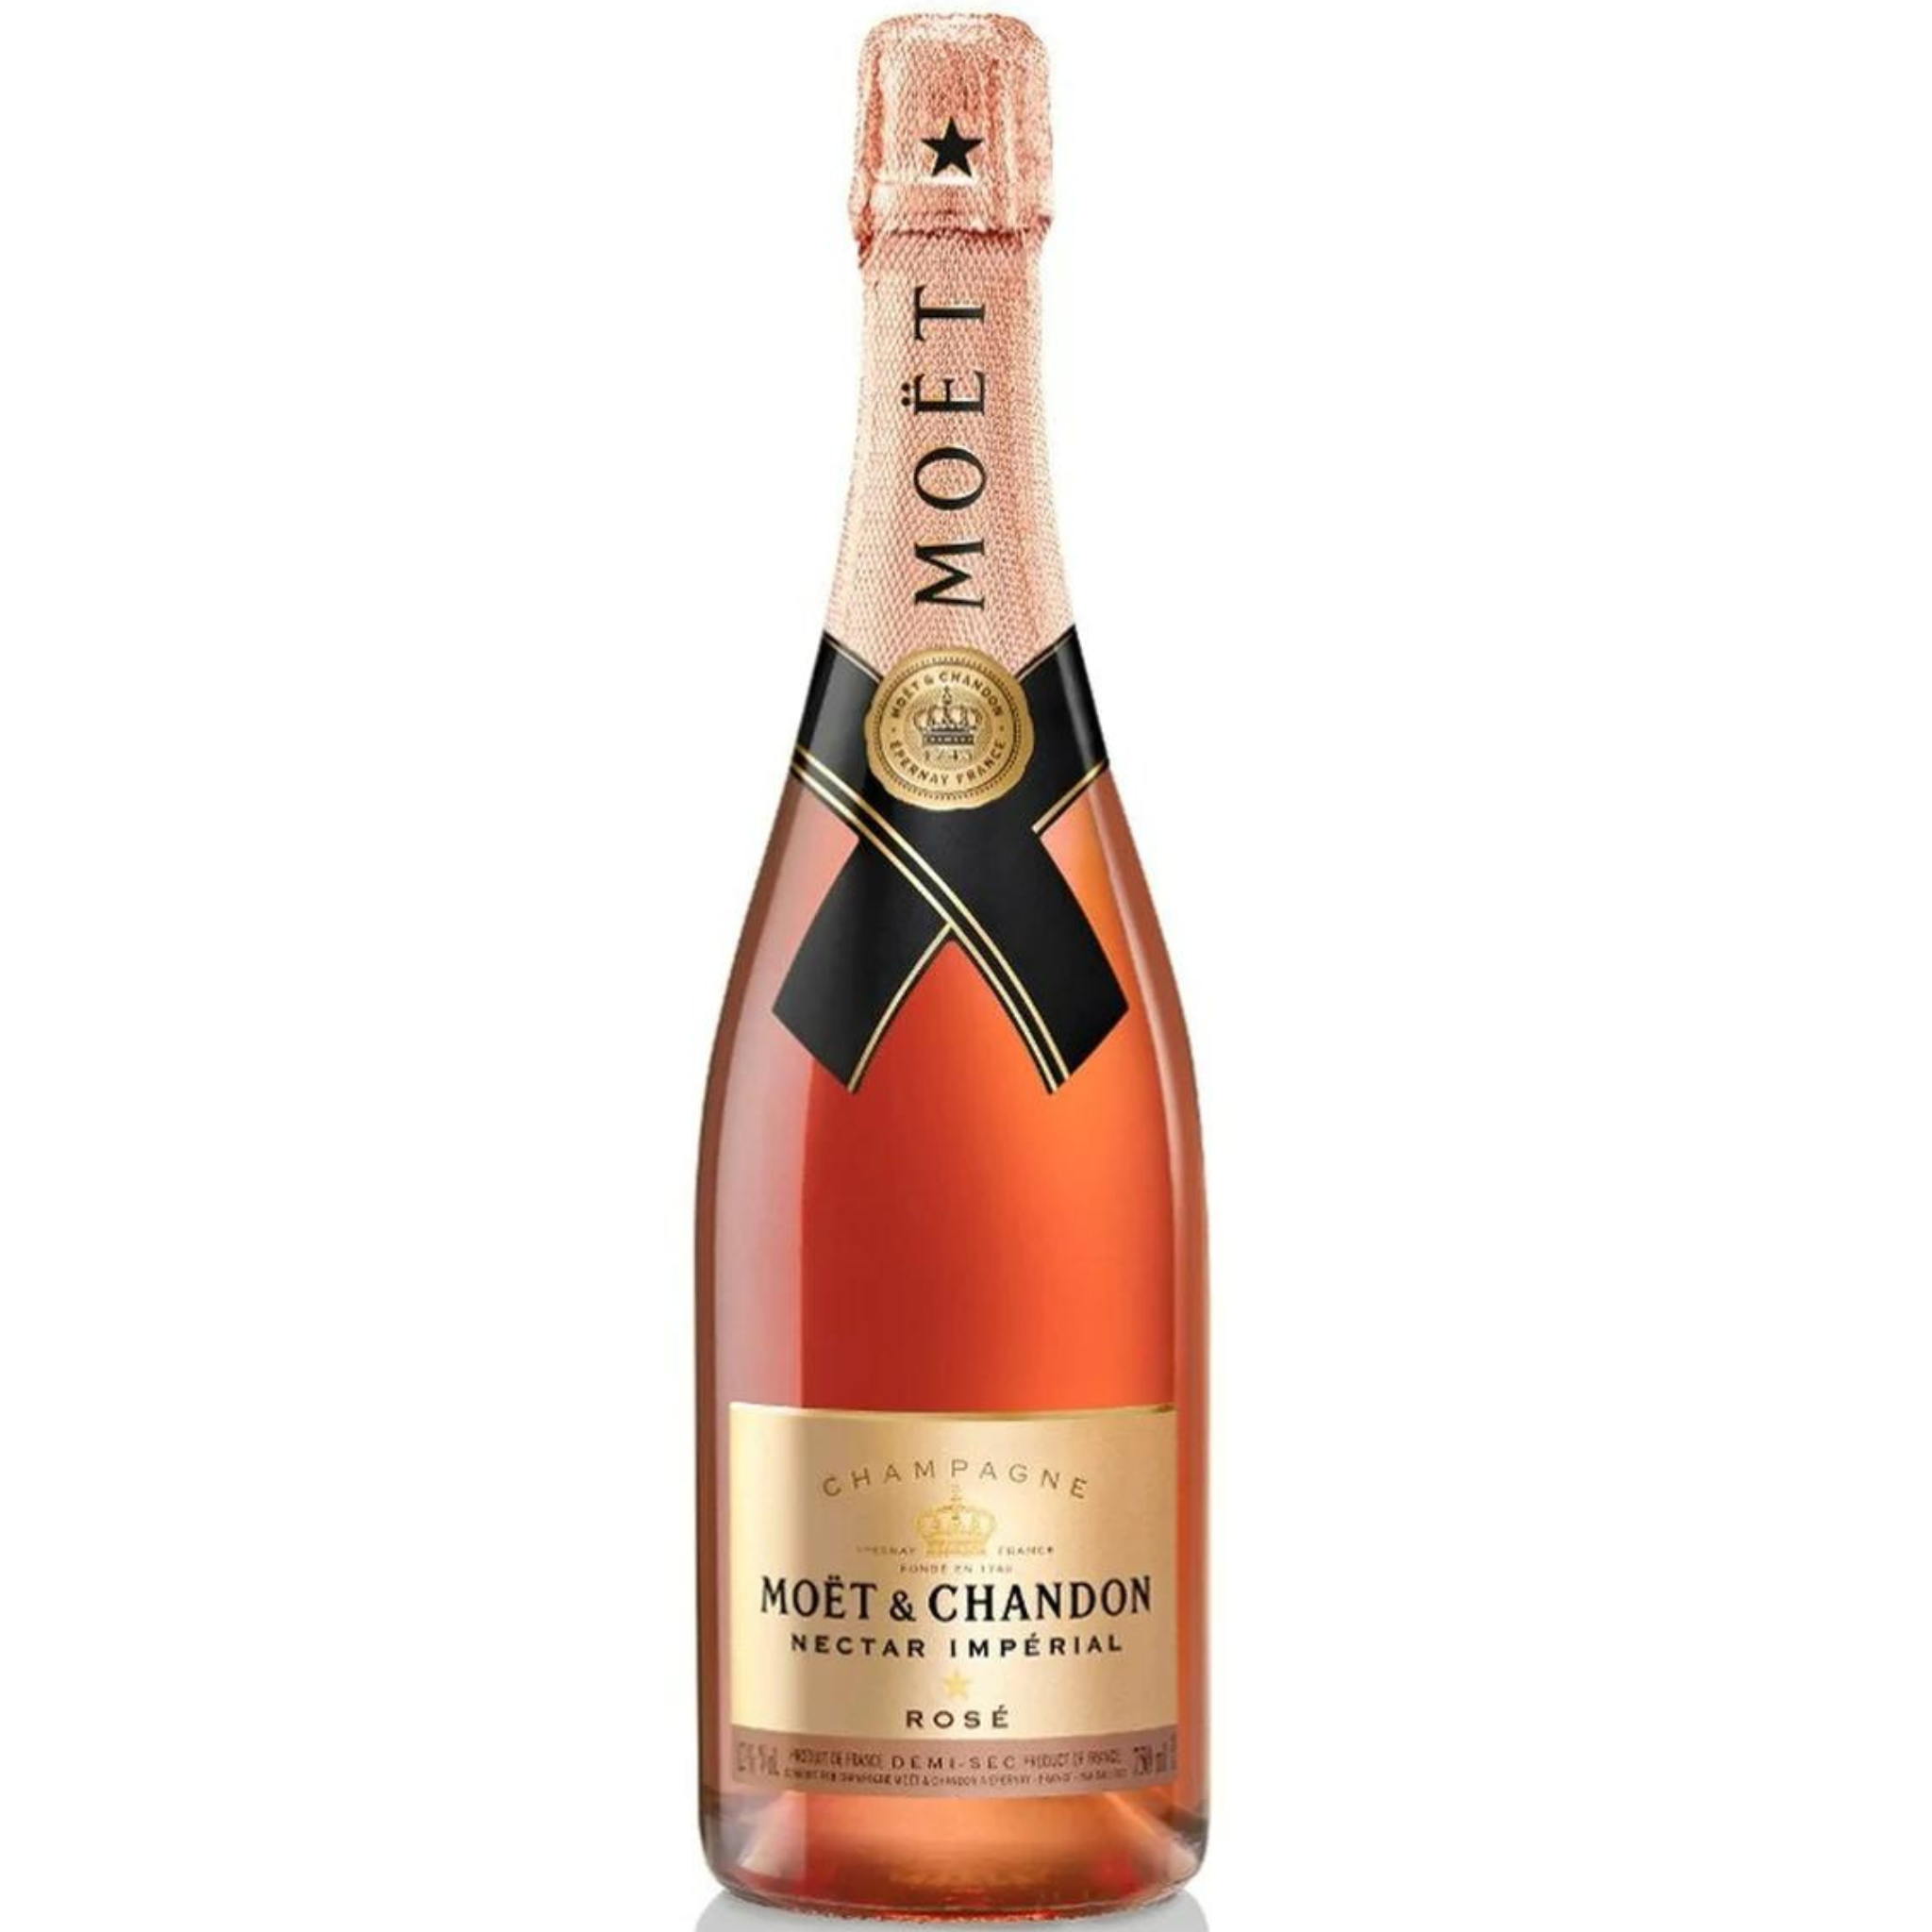 Champagne Rose Moët & Chandon Nectar Imperial